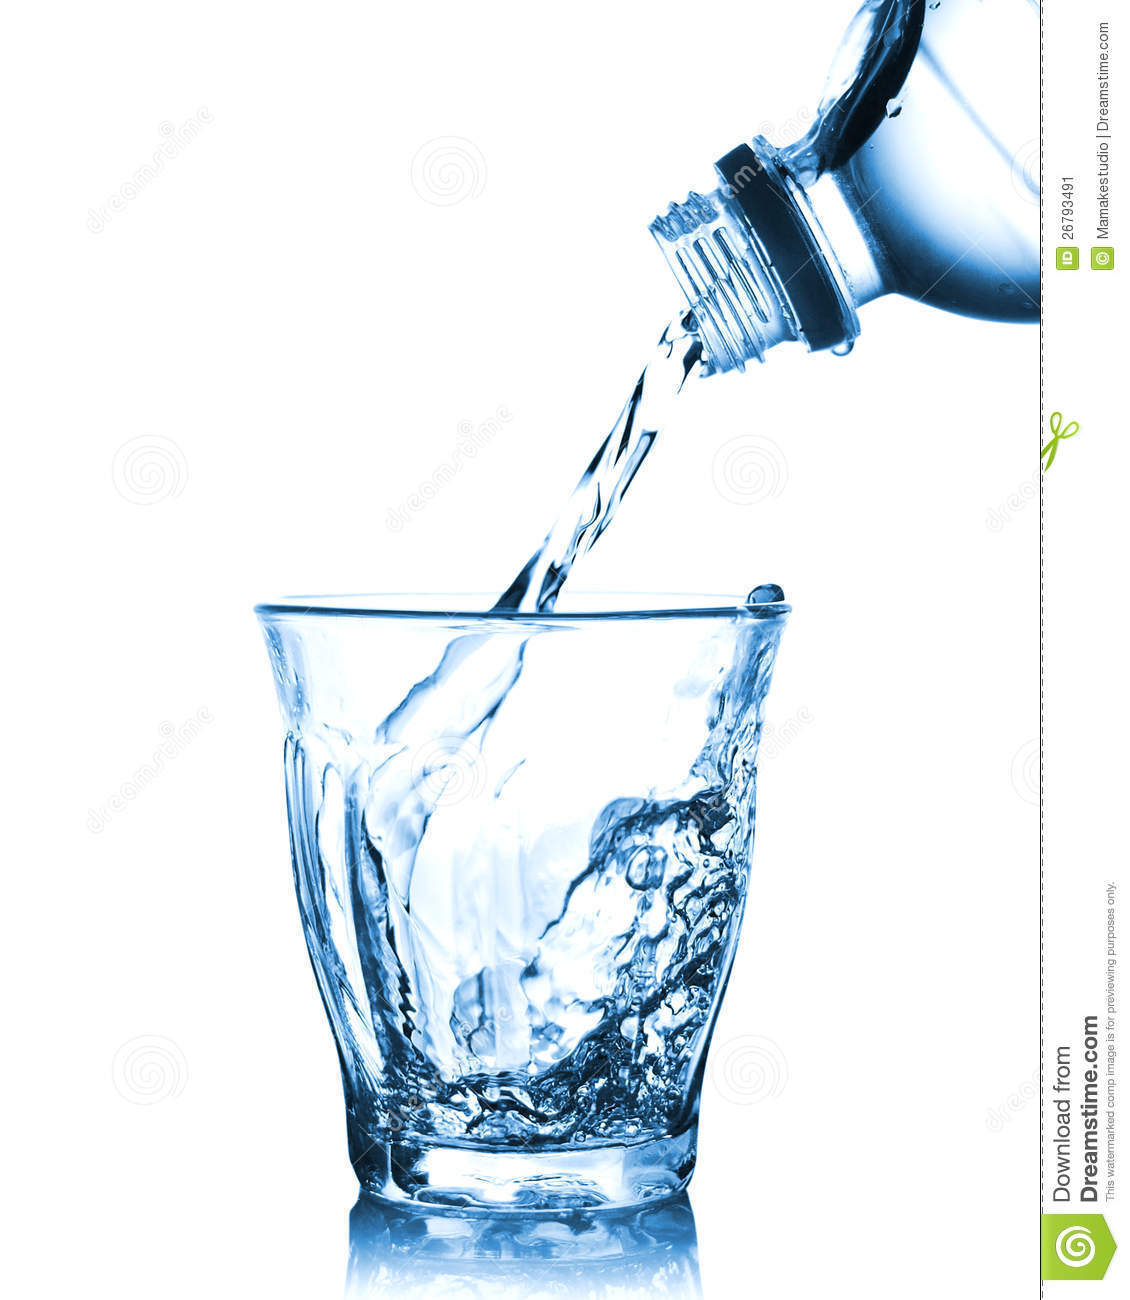 Stock Image  Pouring Water From Bottle Into Glass